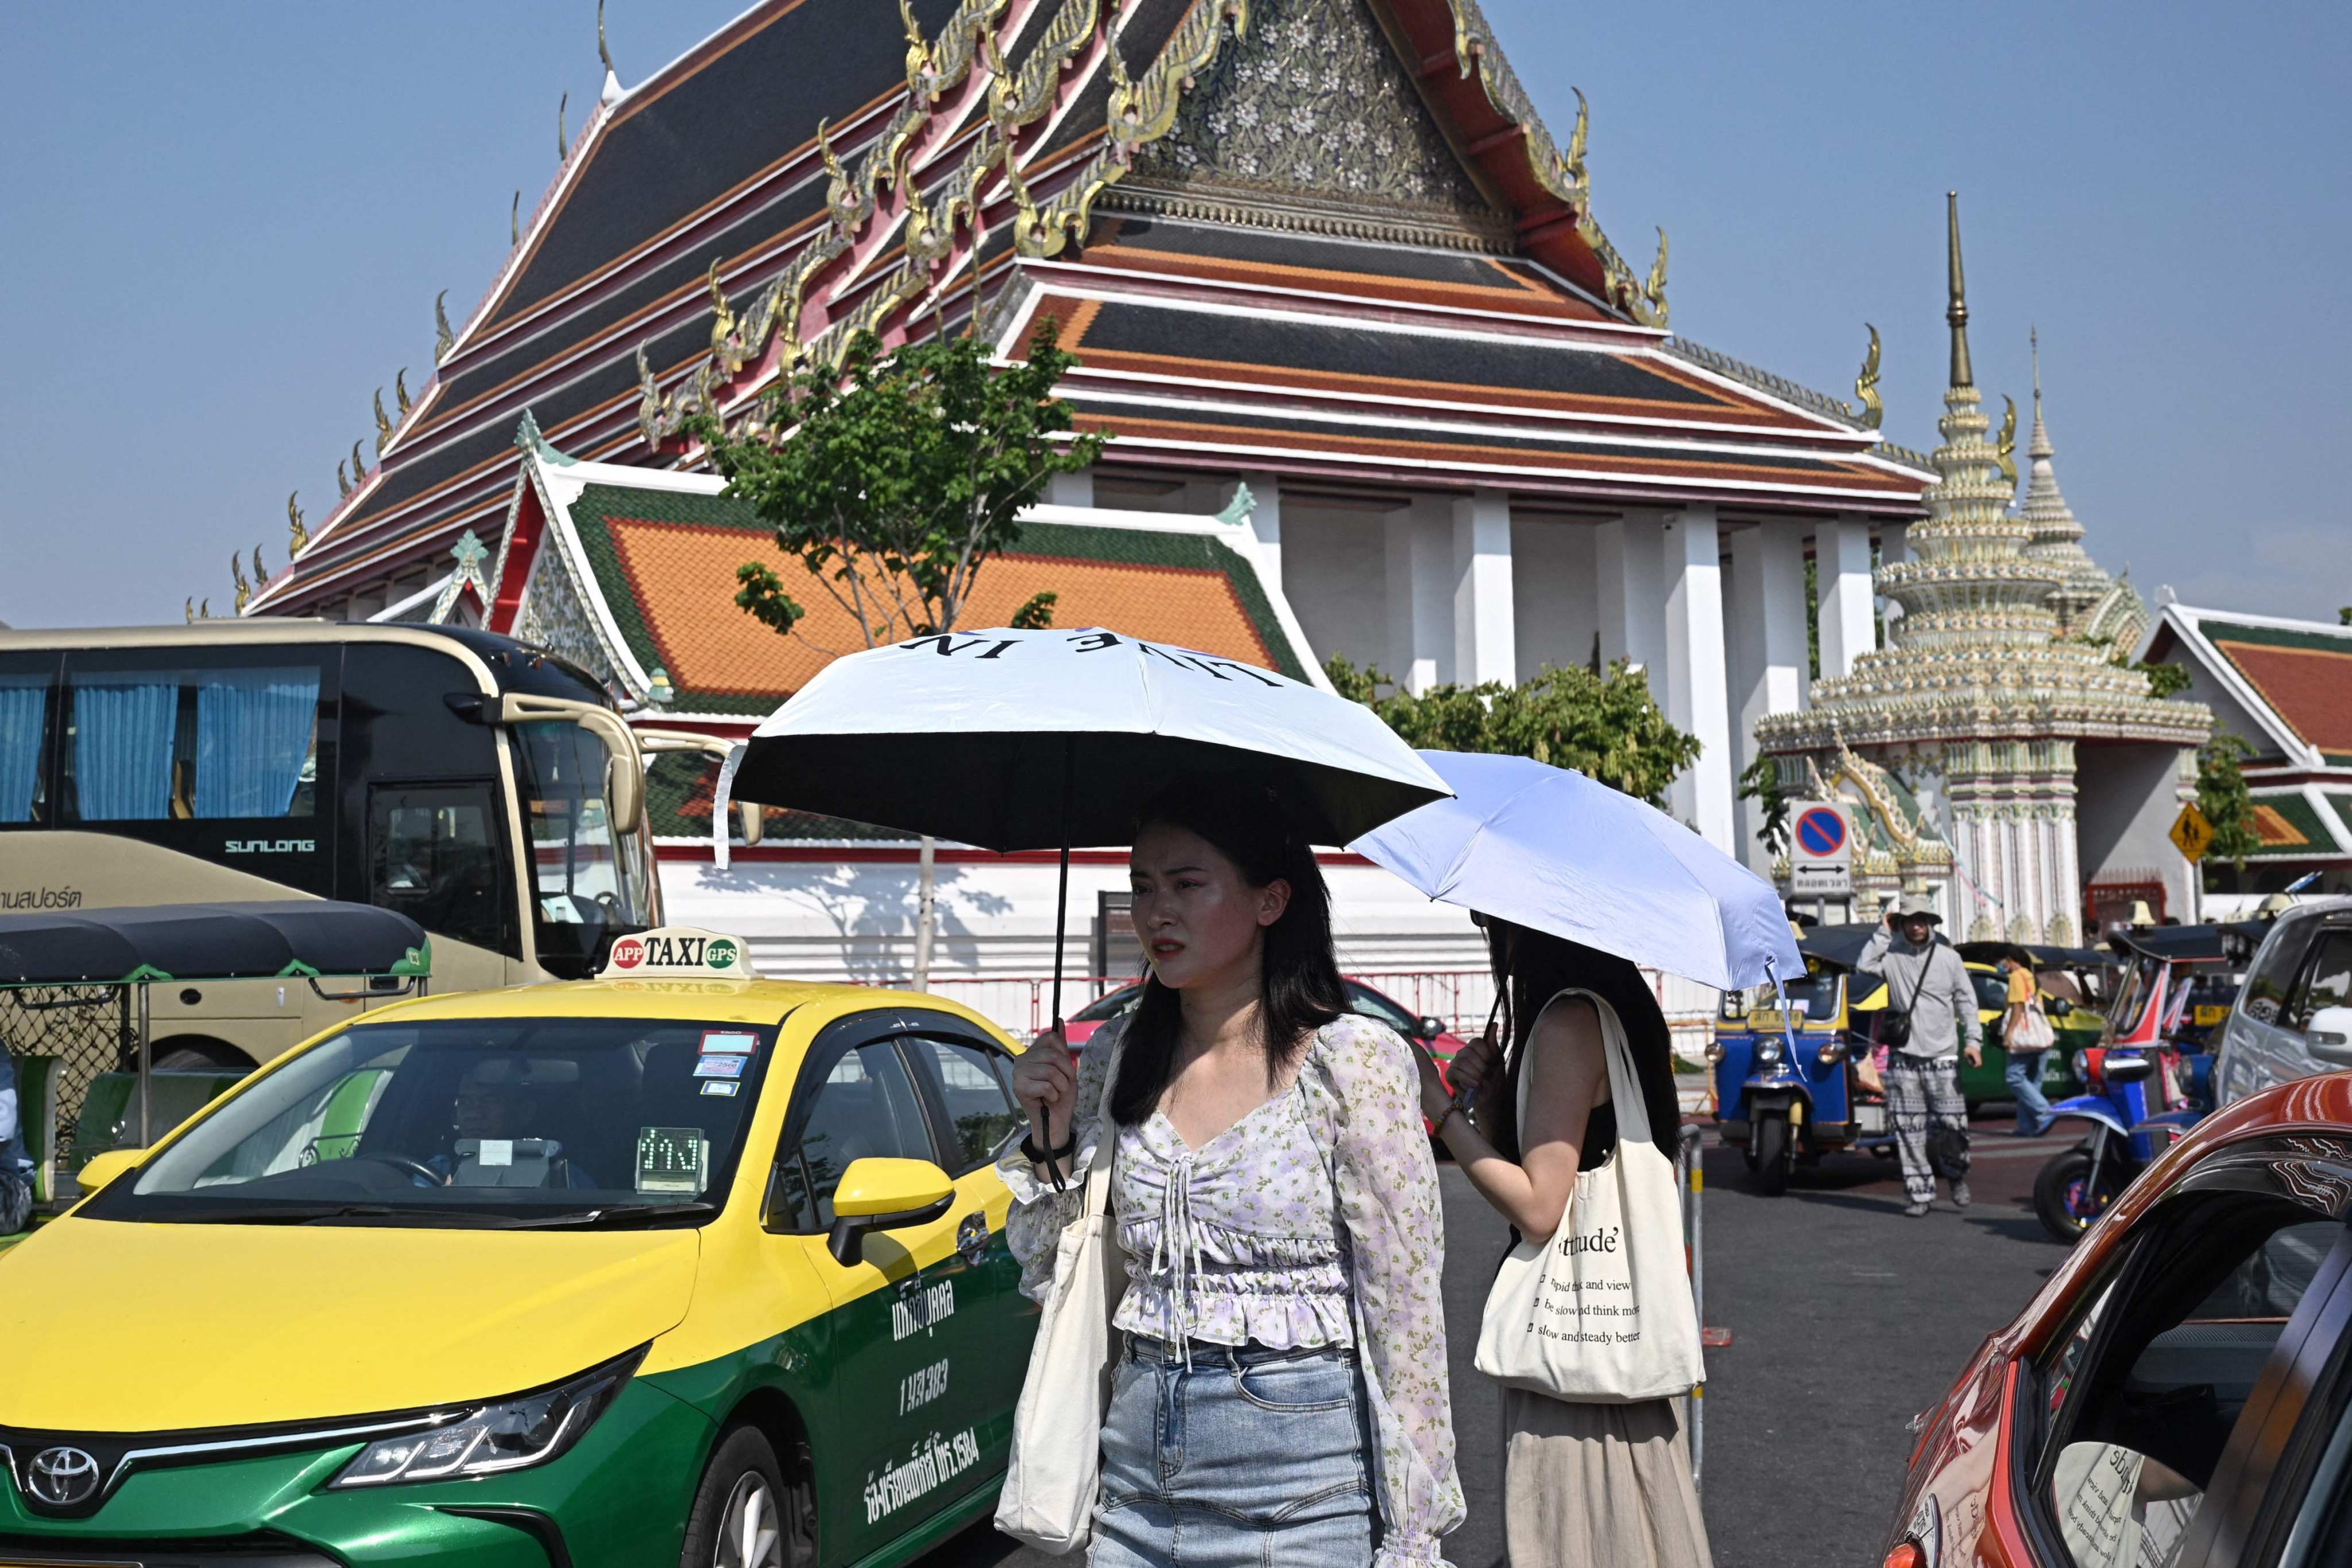 Tourists shield themselves from the sun with umbrellas outside Wat Pho Buddhist temple in Bangkok, Thailand. Photo: AFP